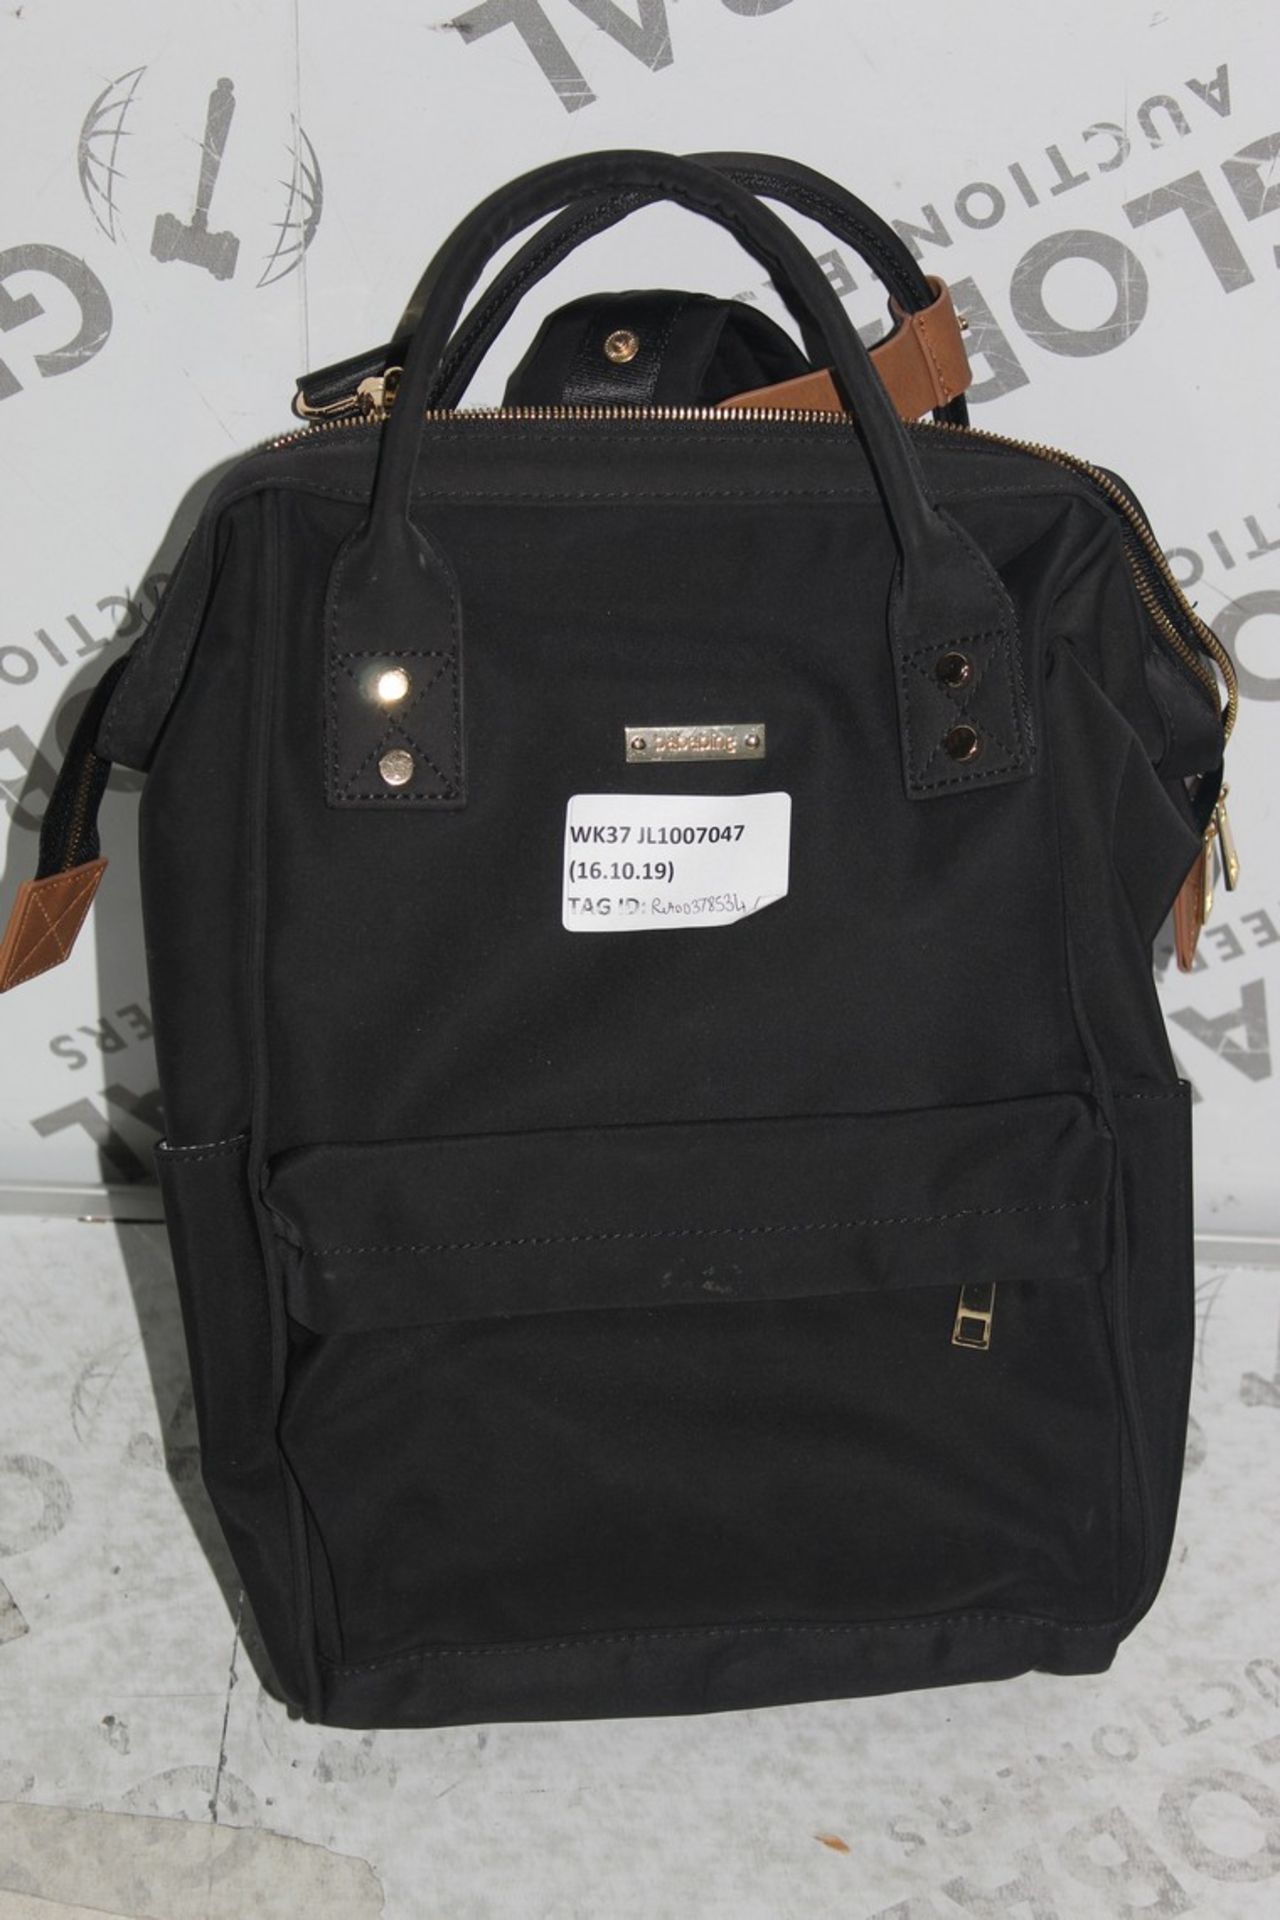 BaBaBing Black Children's Changing Bags RRP £50 Each (RET00378534) (Public Viewing and Appraisals